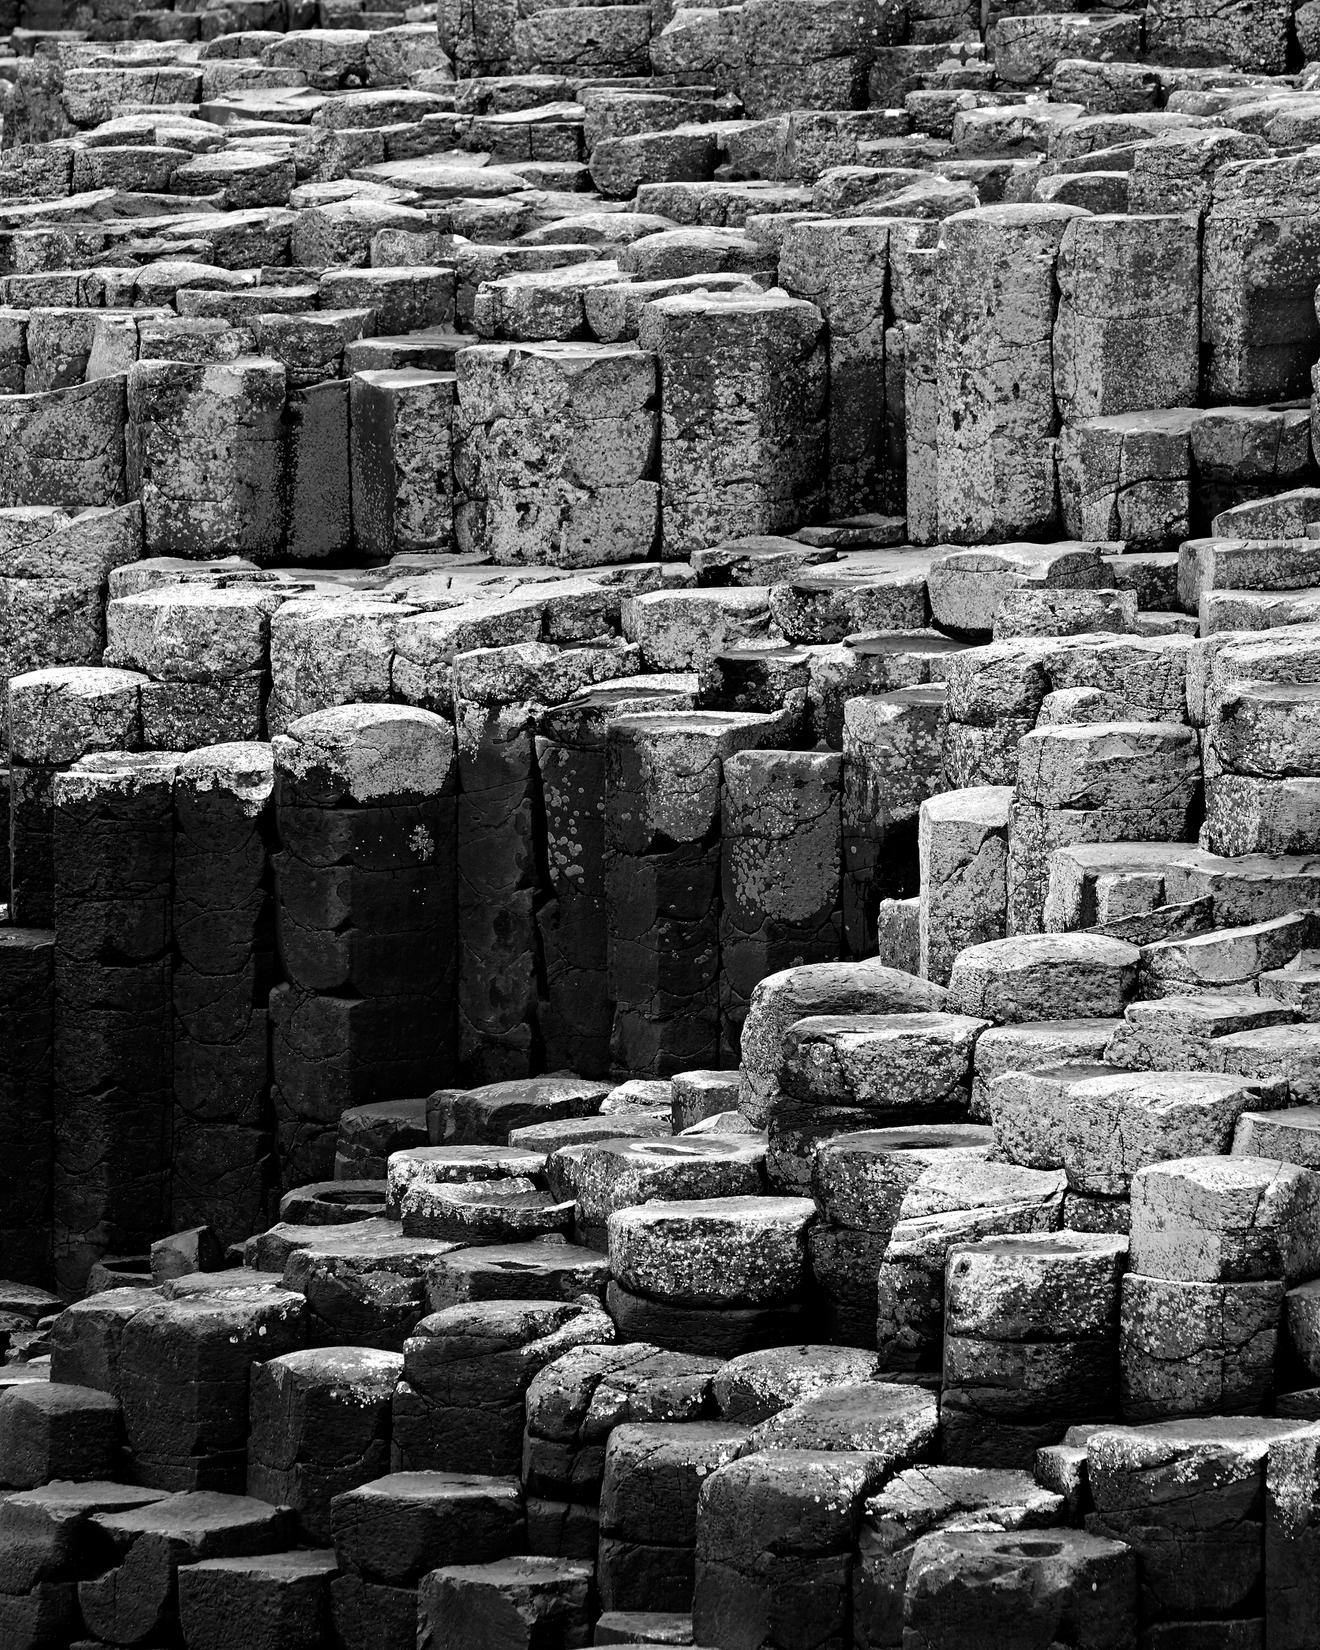 Black and white image of the stones of the Giants Causeway in Ireland